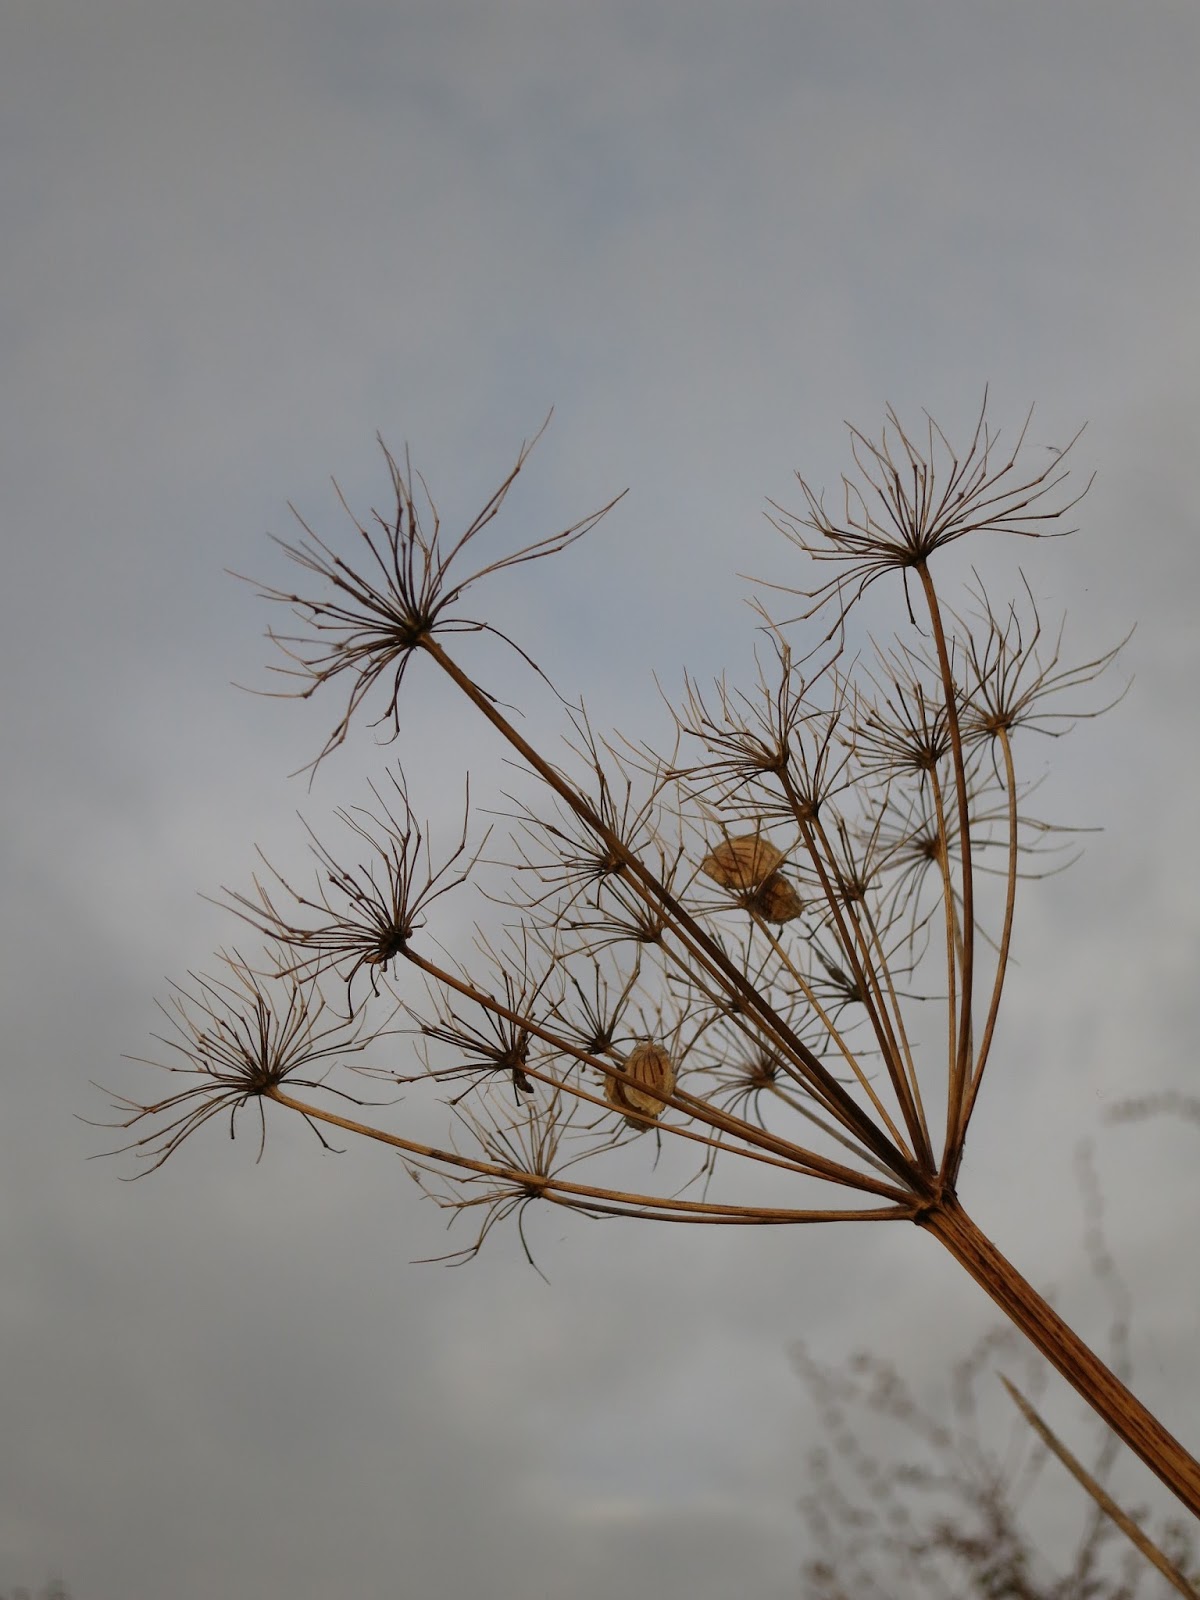 Bare headed umbelliferous plant with four seeds still attached